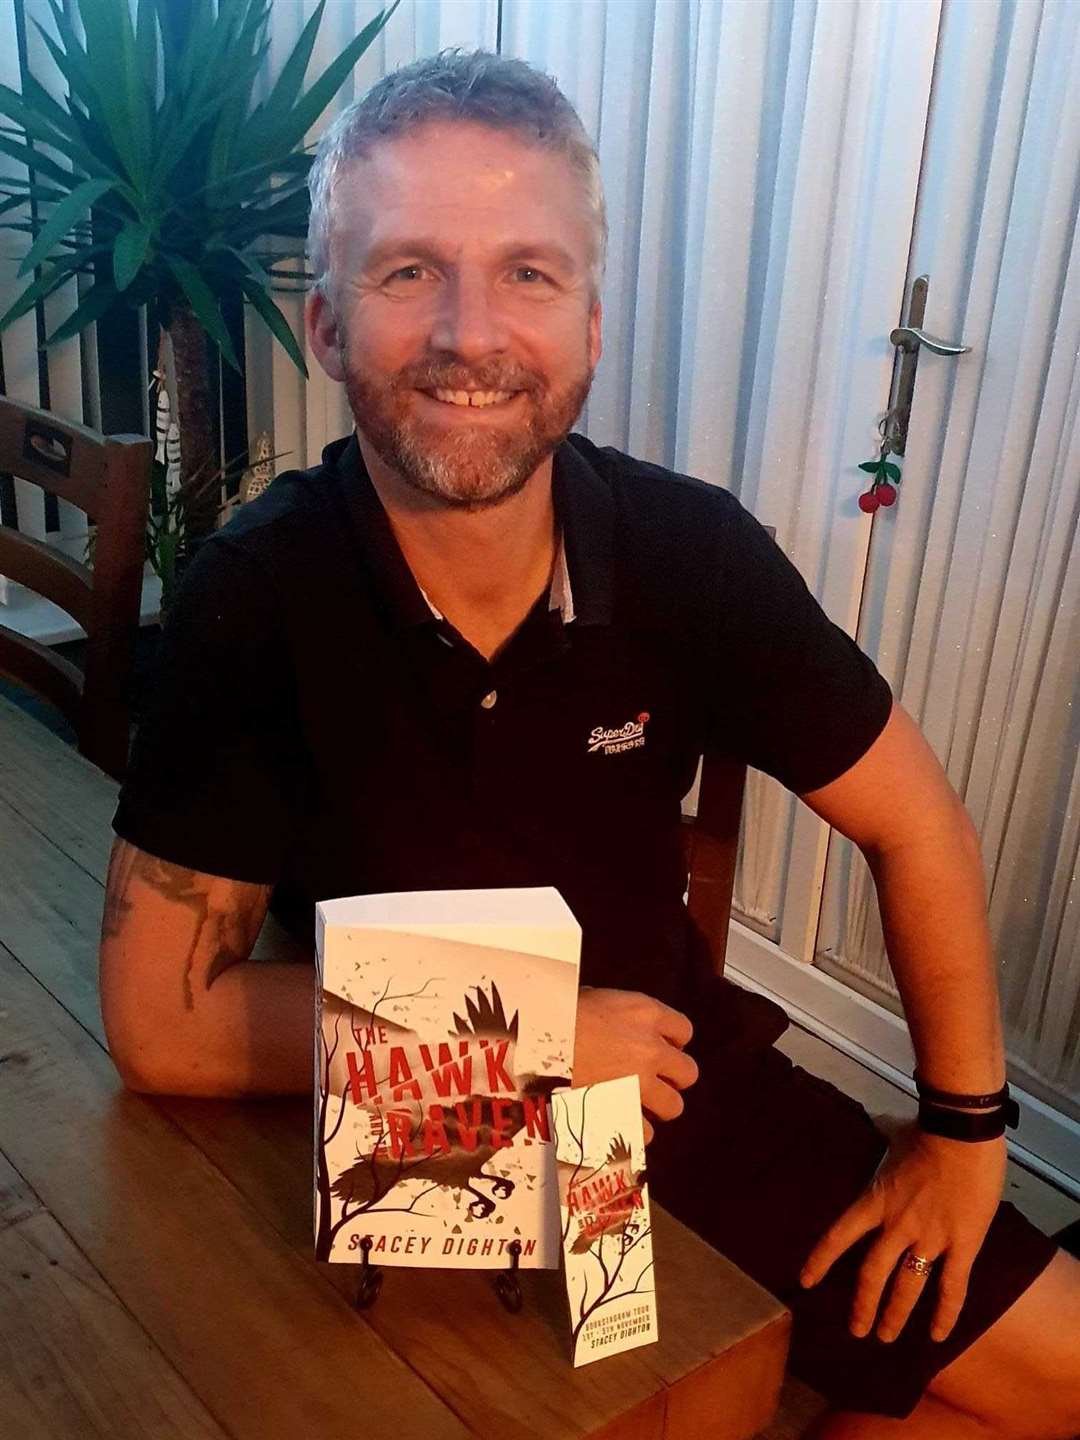 Sittingbourne author Stacey Dighton with his latest book The Hawk and The Raven